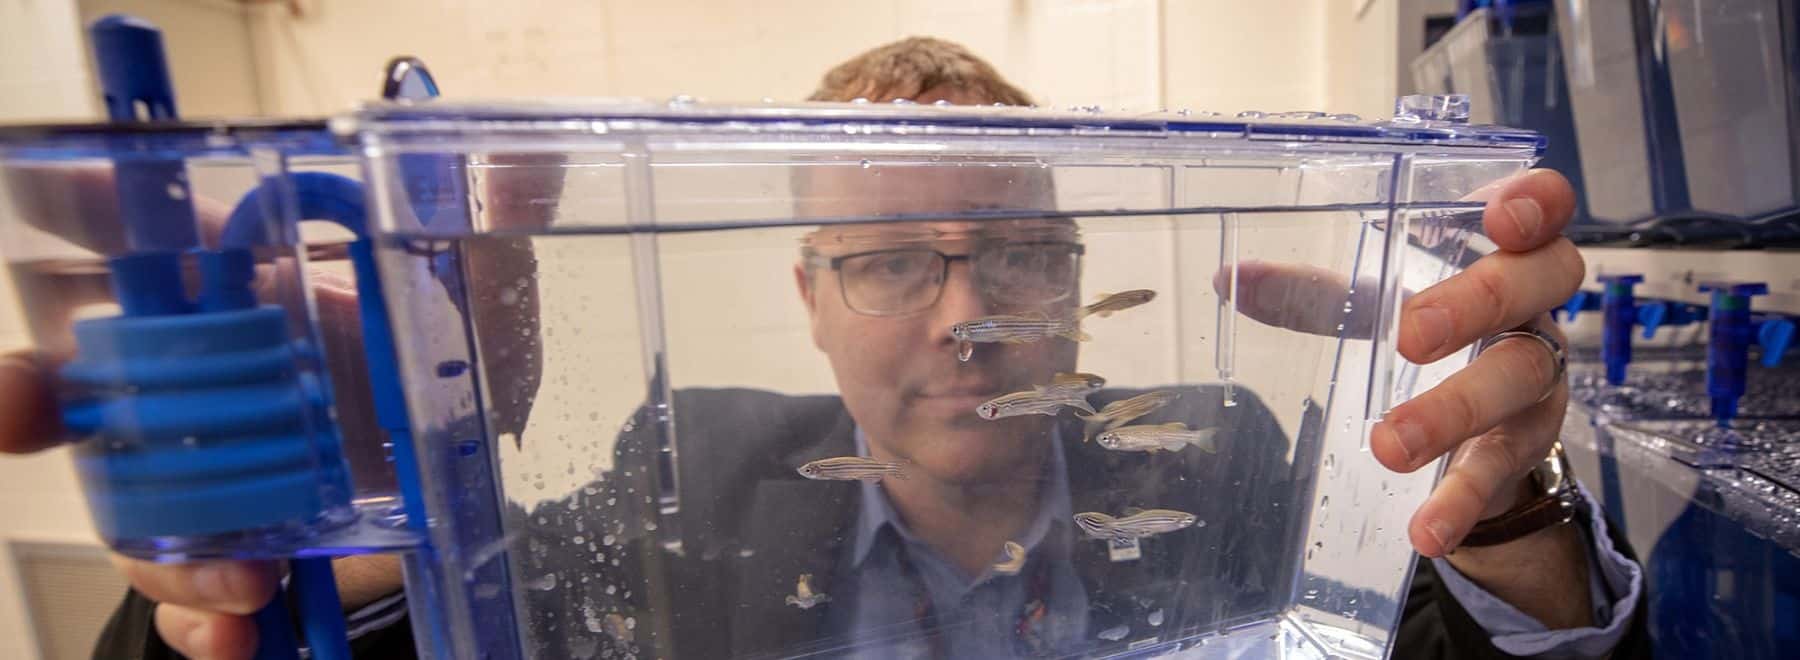 Male researcher examines fish experiment